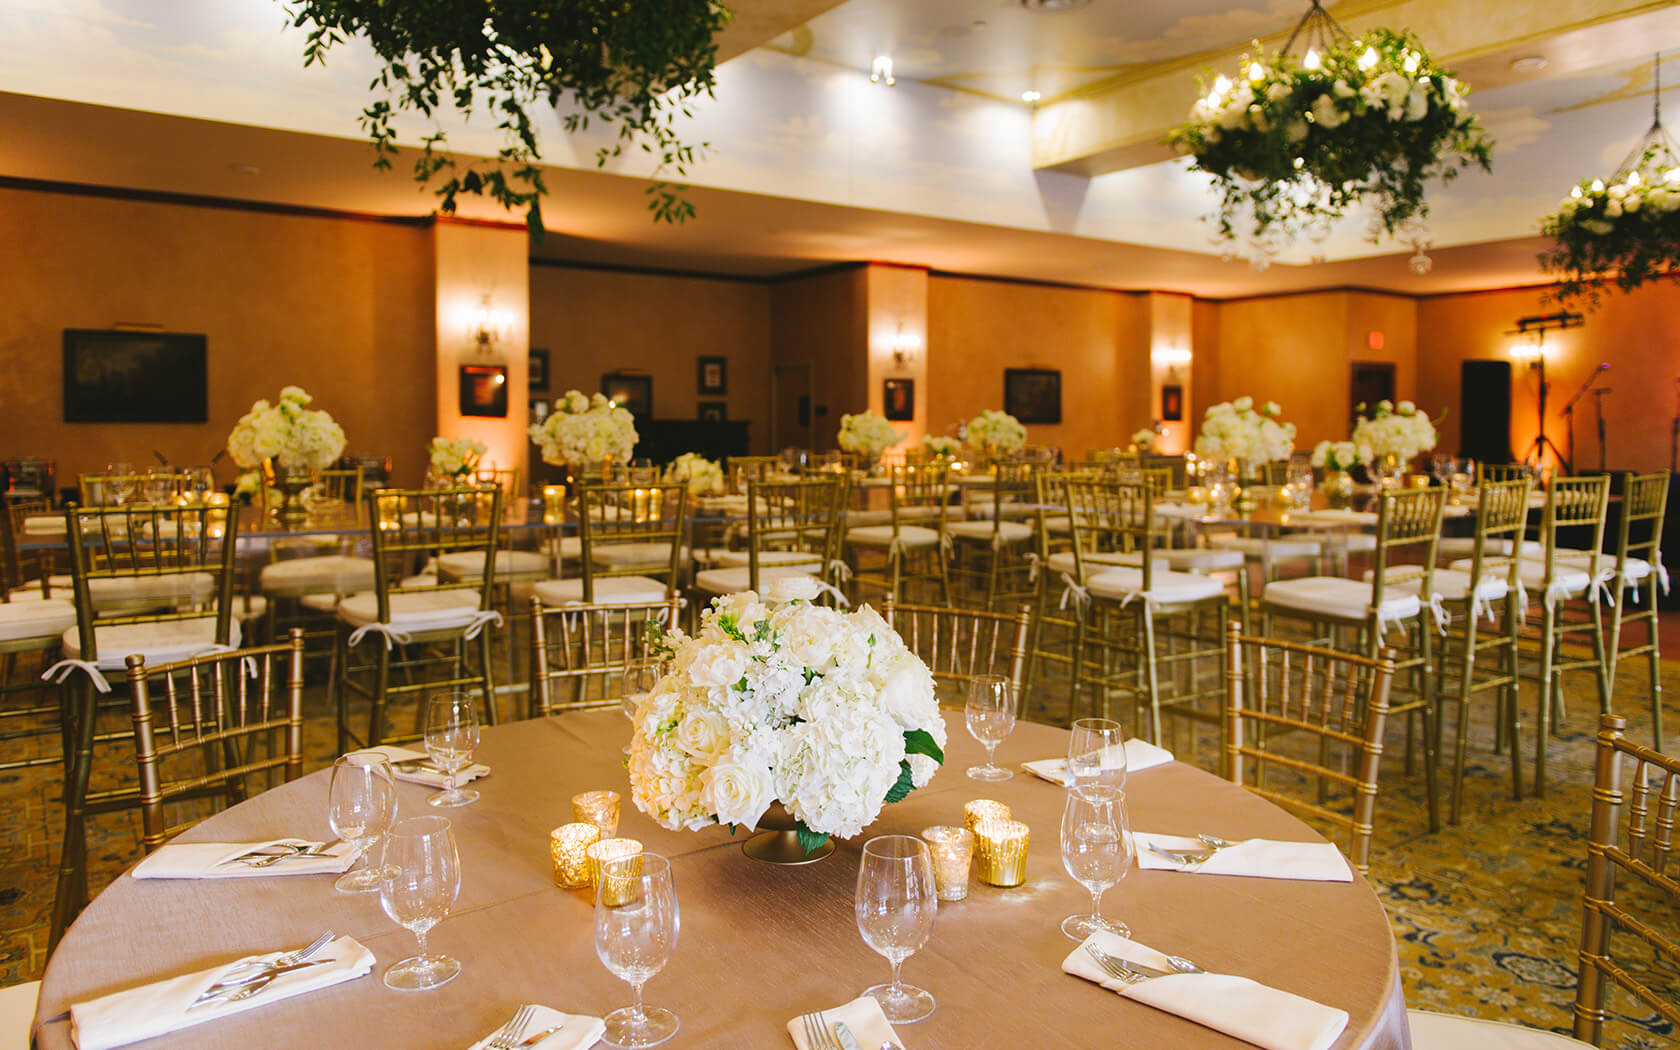 venue space decorated for a weddings and full of flowers